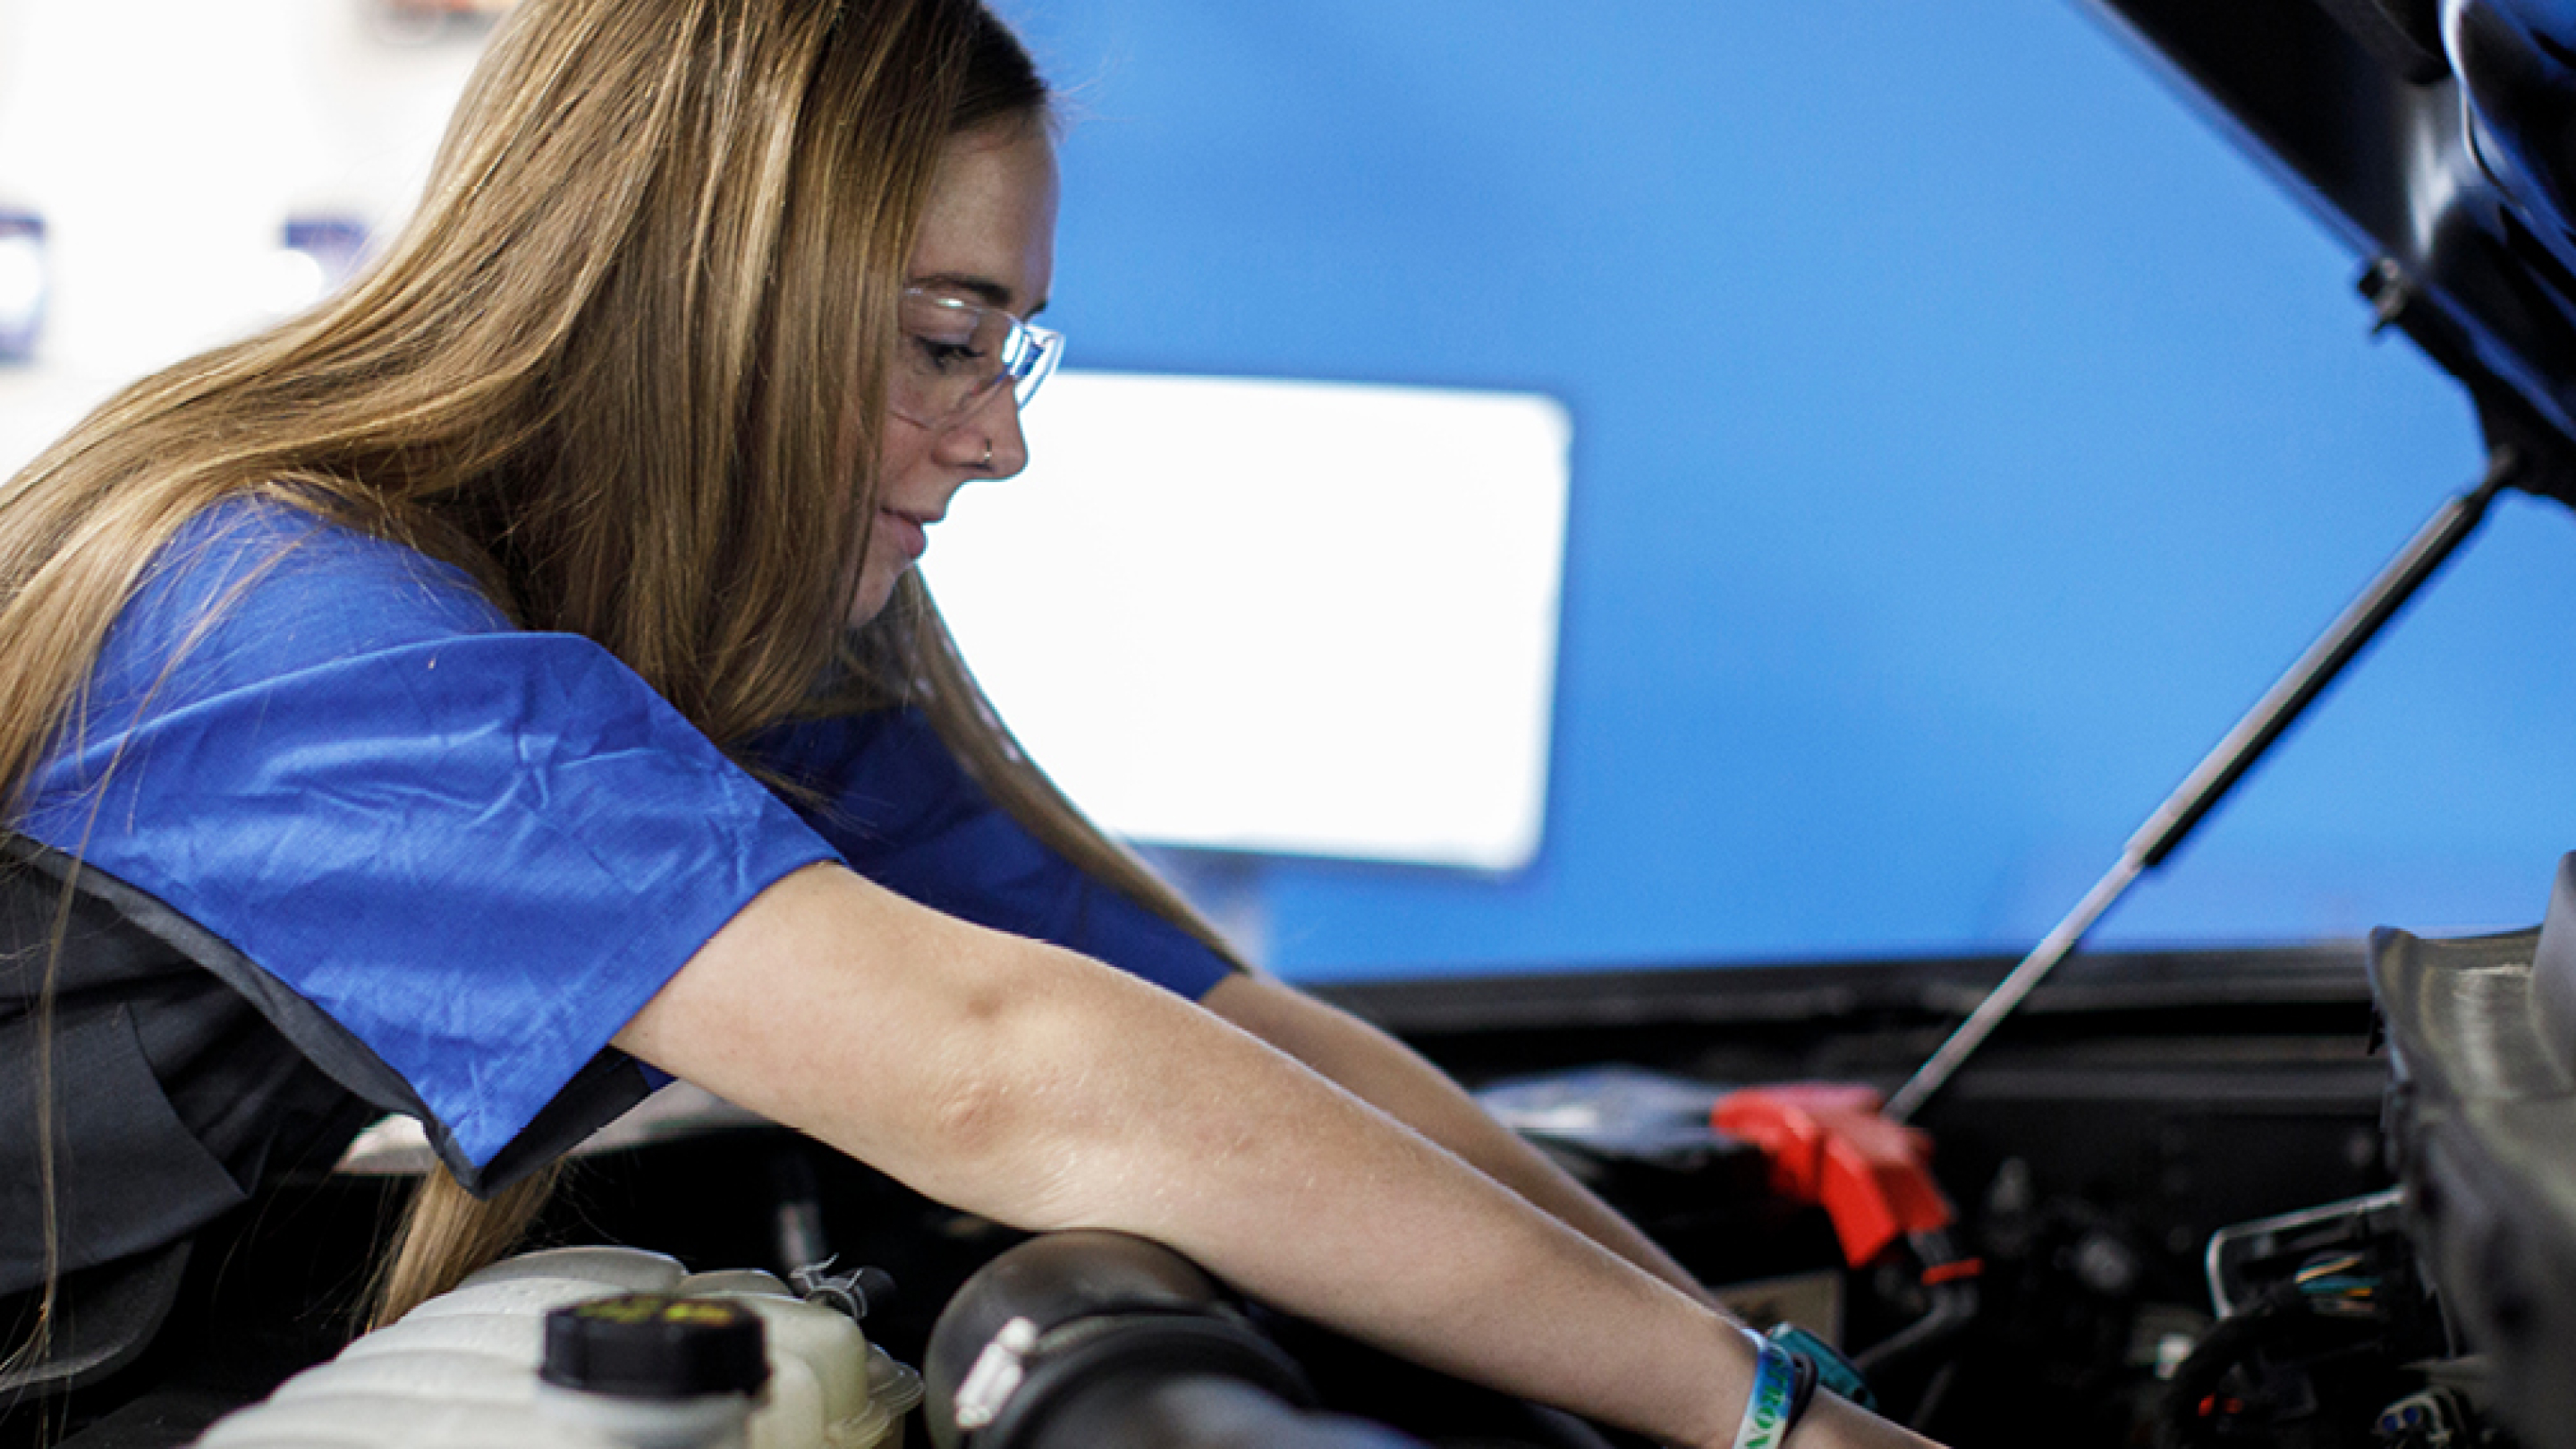 A girl working on a car